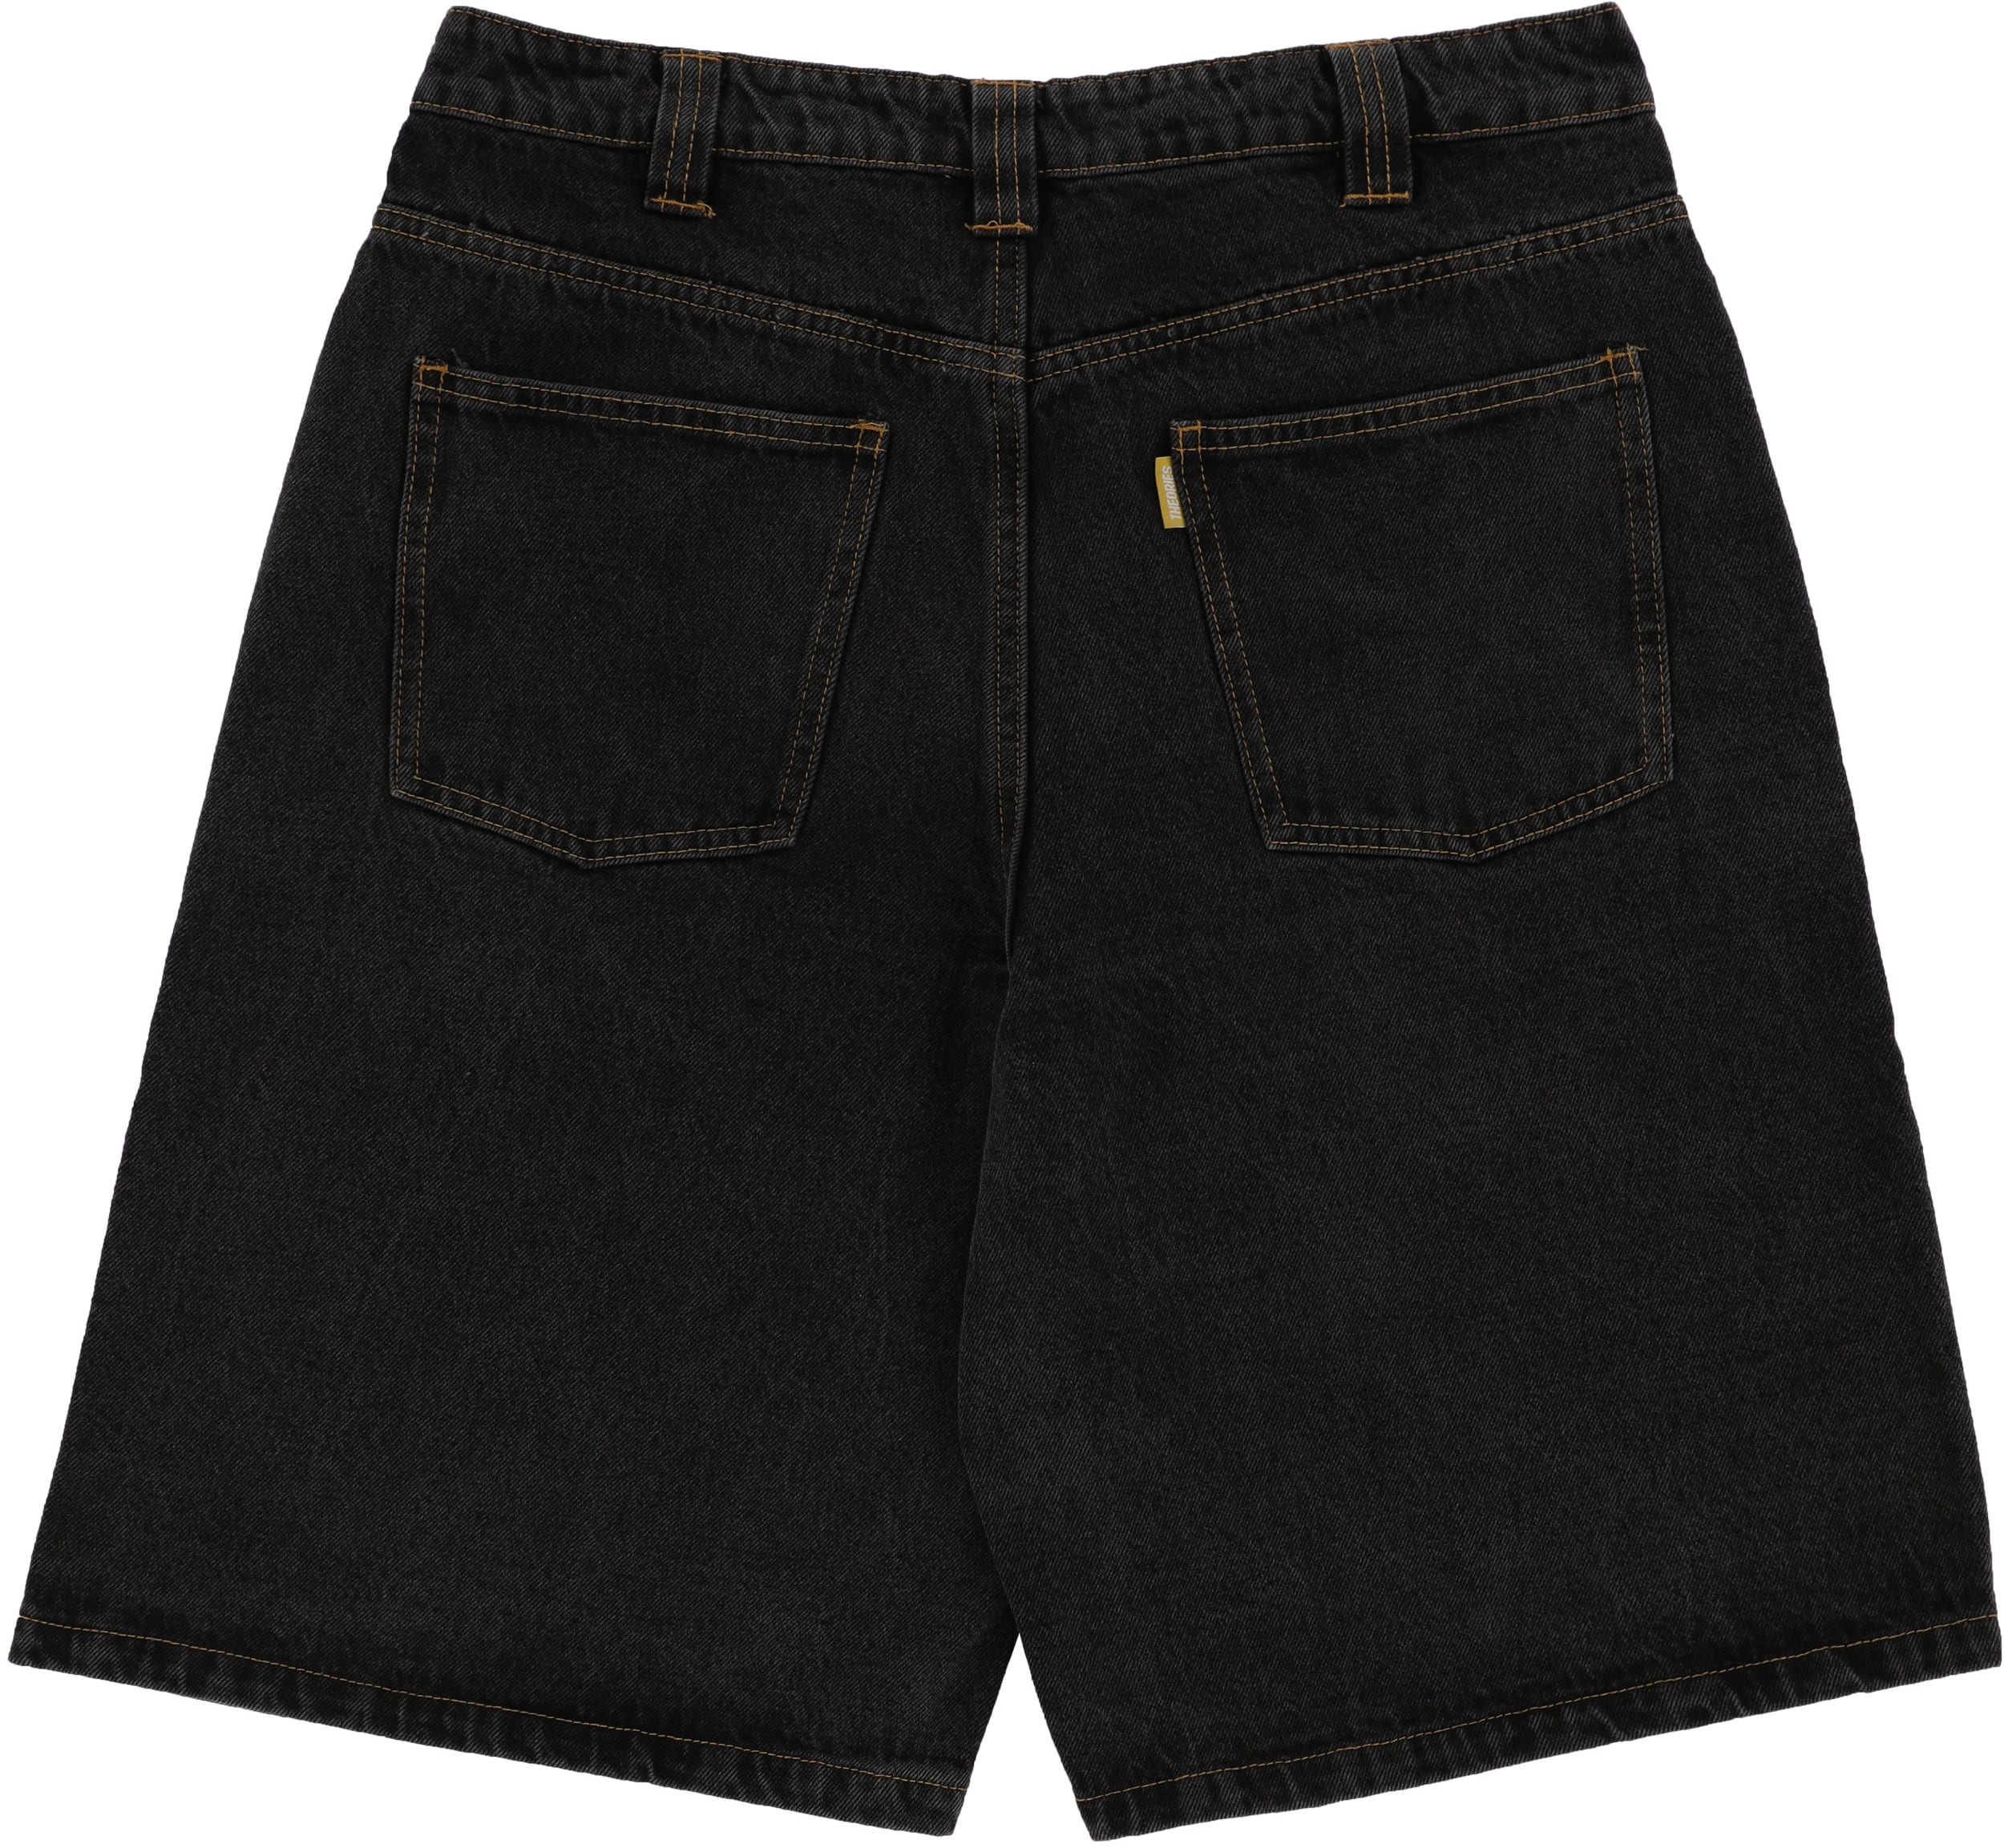 Theories Plaza Jean Shorts - washed black - Free Shipping | Tactics